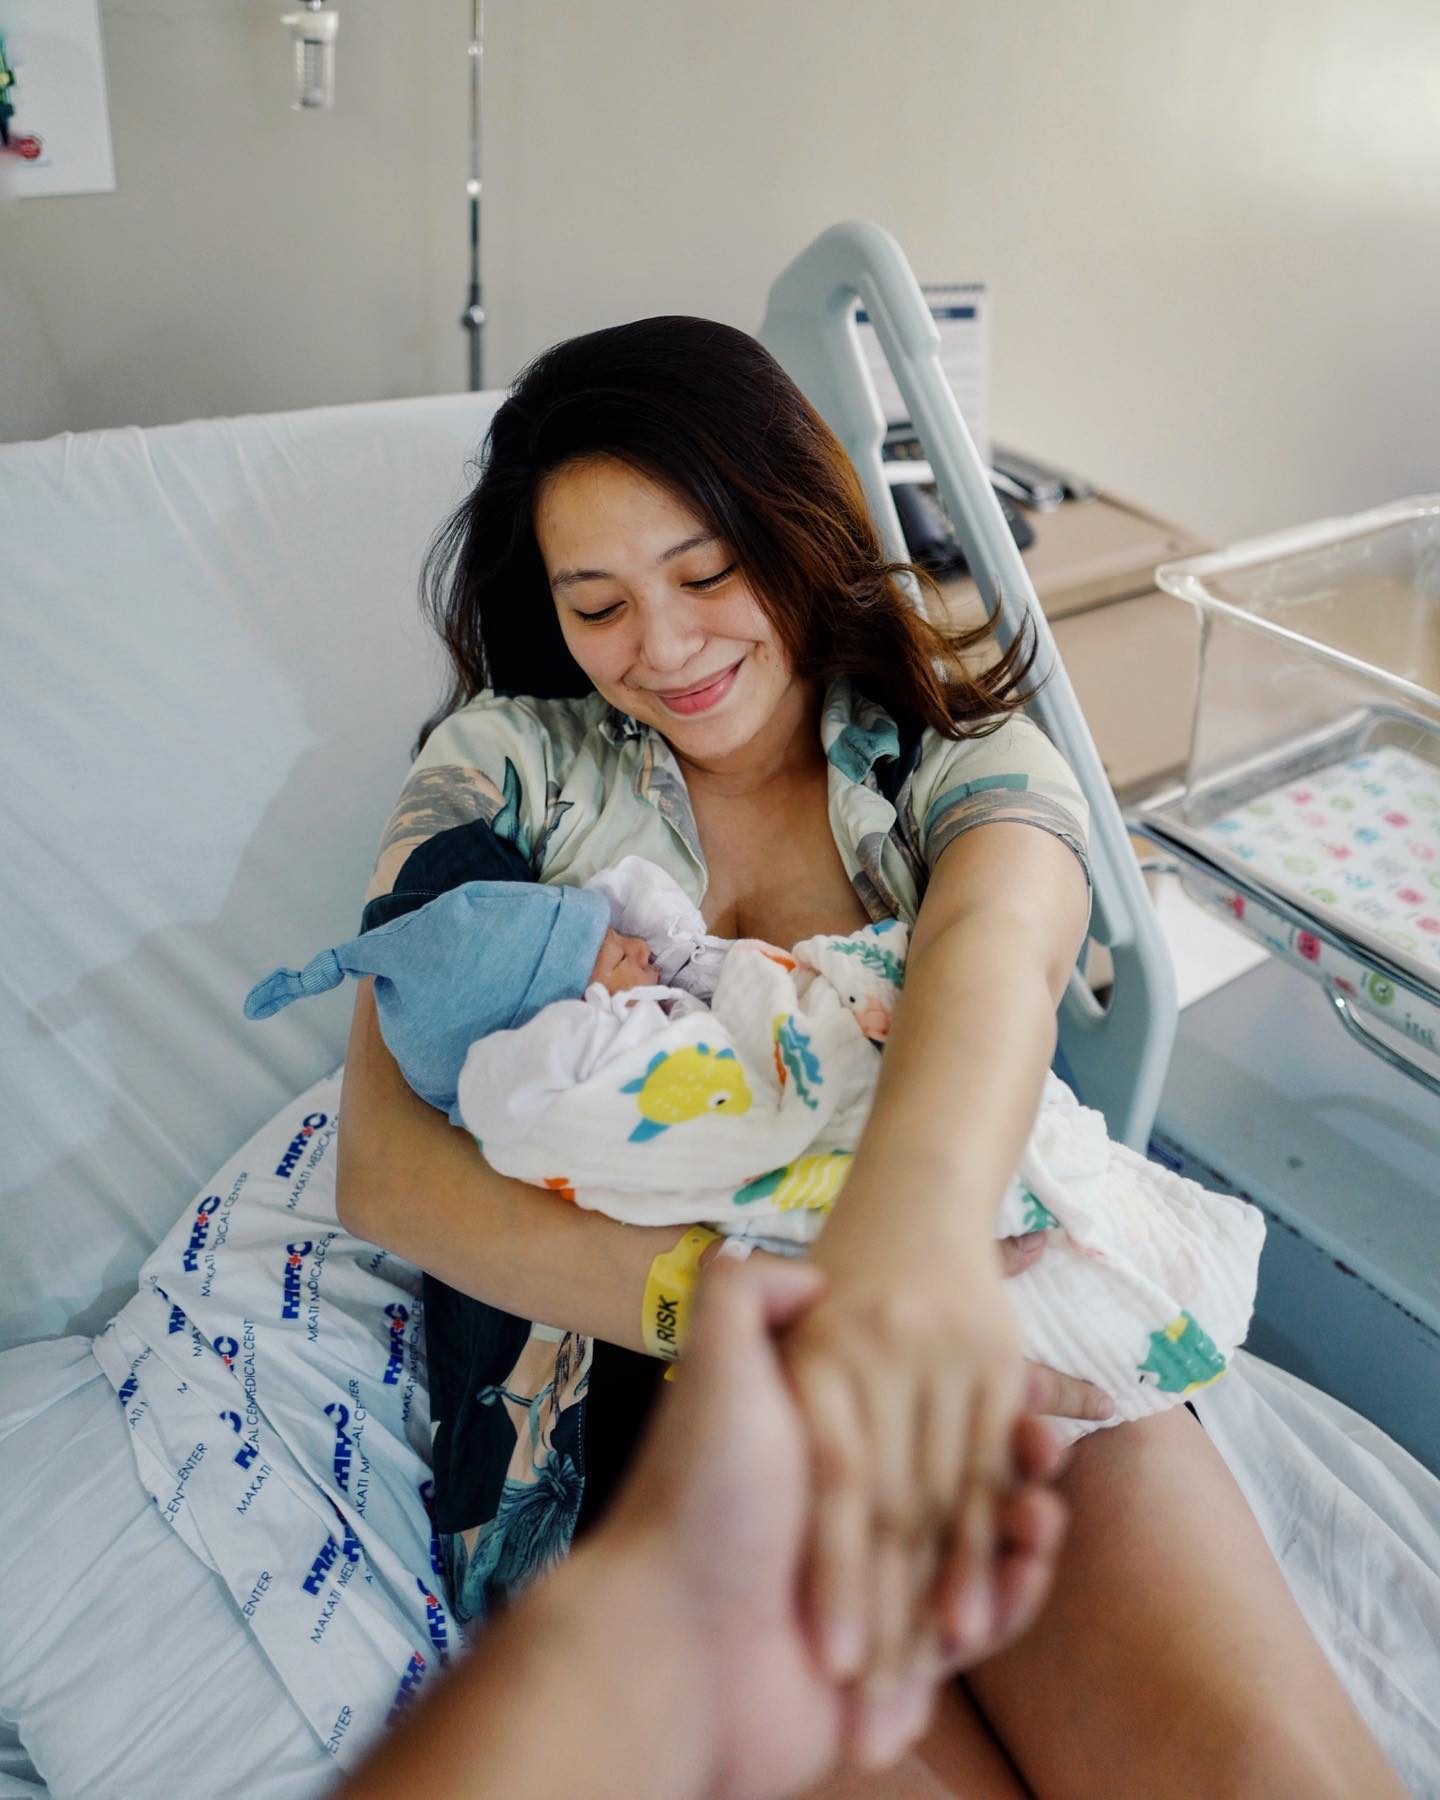 Joyce Pring, Juancho Triviño welcome first child